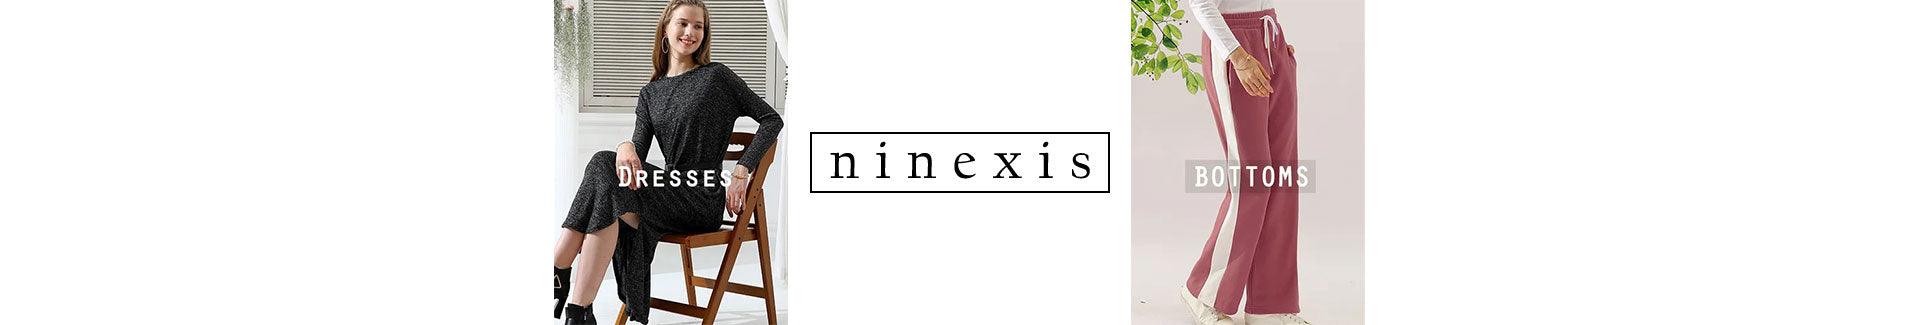 Buy Ninexis Tops, Dresses, Bottoms On Sale - Daily Fashion